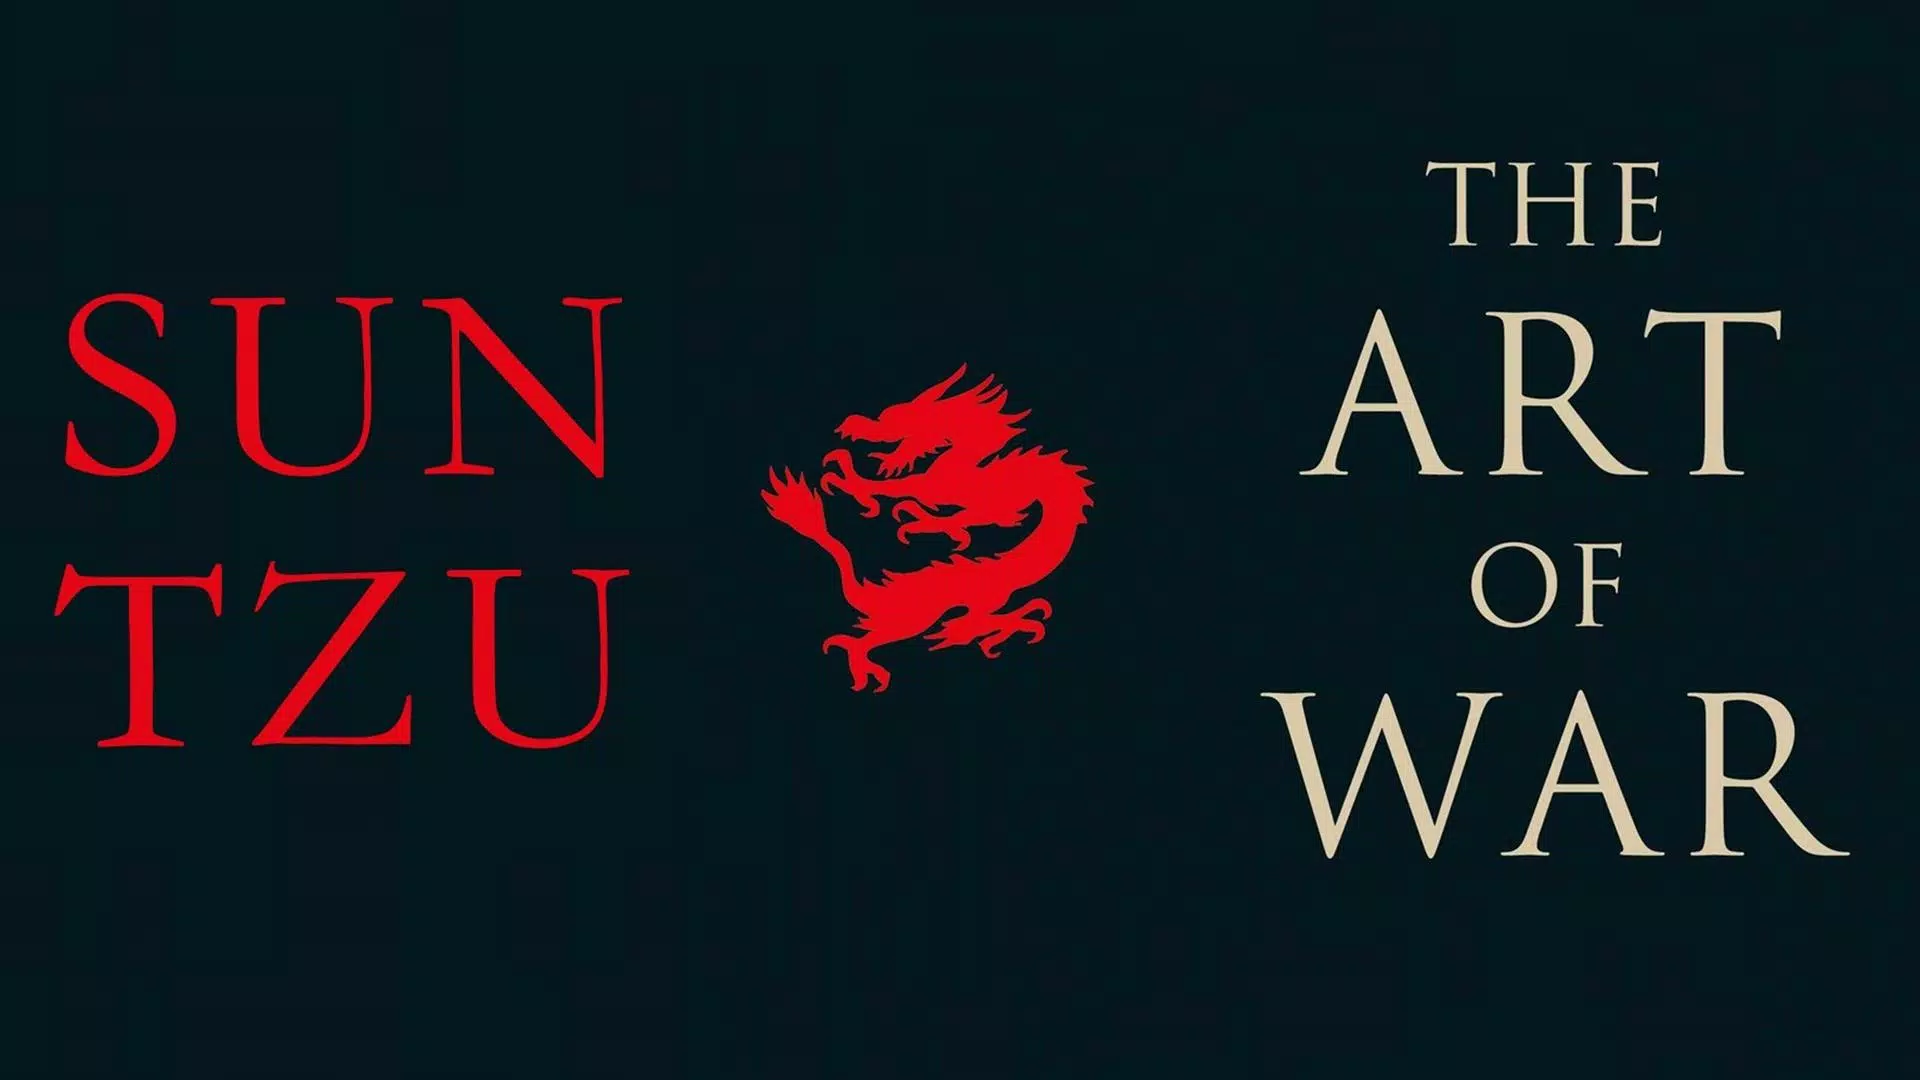 Download do APK de The Art Of War by Sun Tzu - Ebook, Quote and Audio para  Android